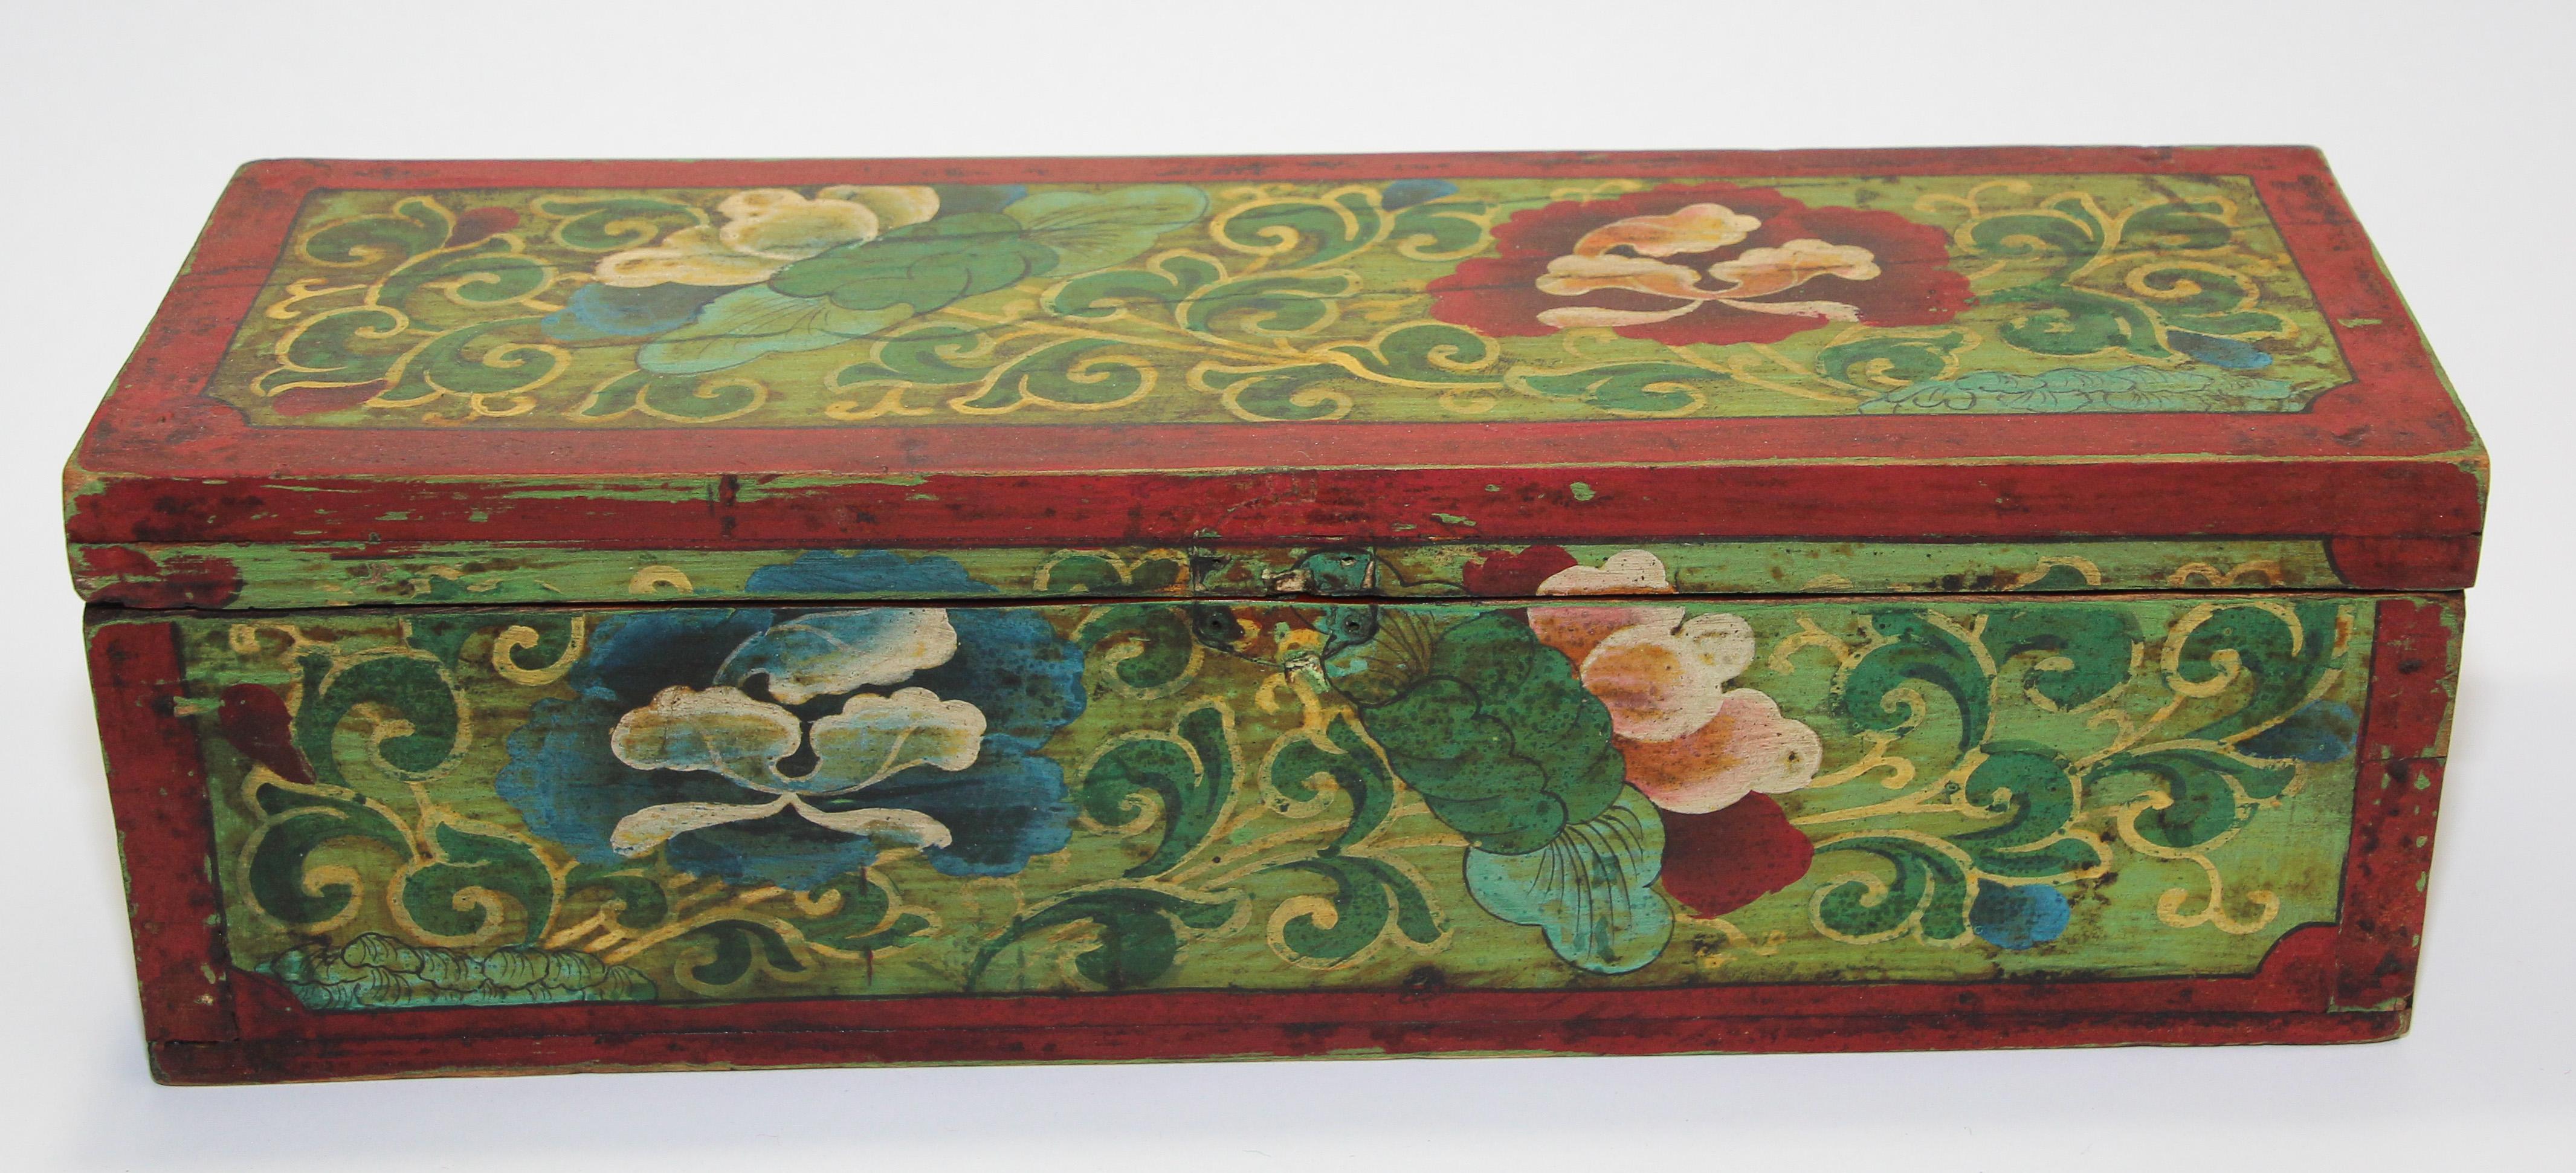 Wood Tibetan Hand Painted Decorative Box with Floral Designs